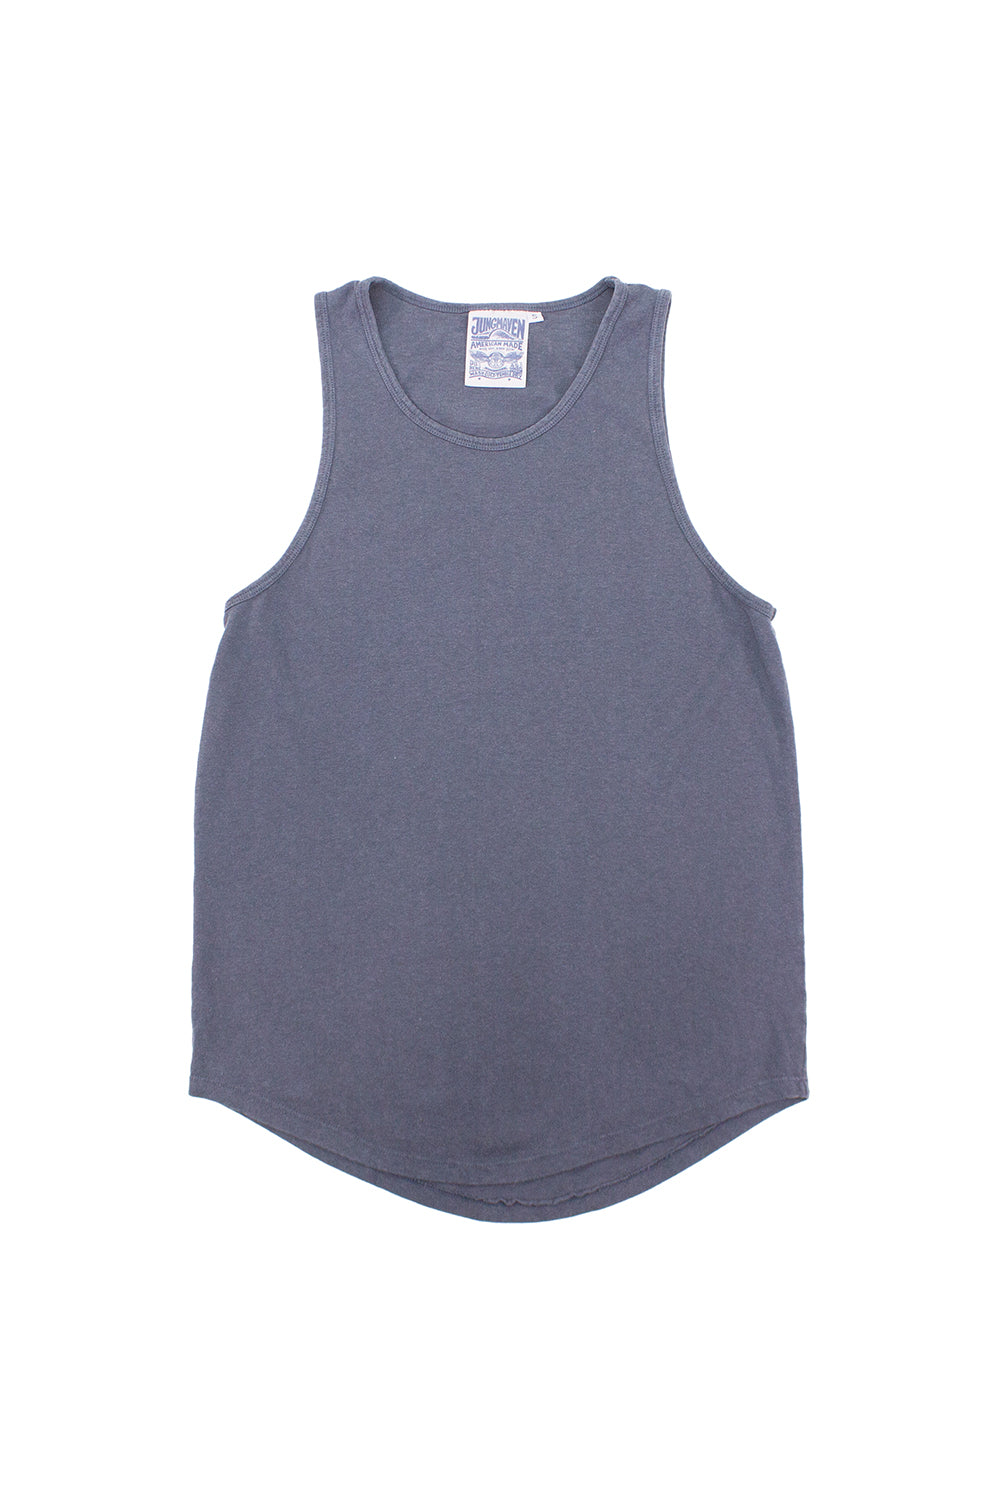 Tank Tops for Women – Tagged tanks Page 2